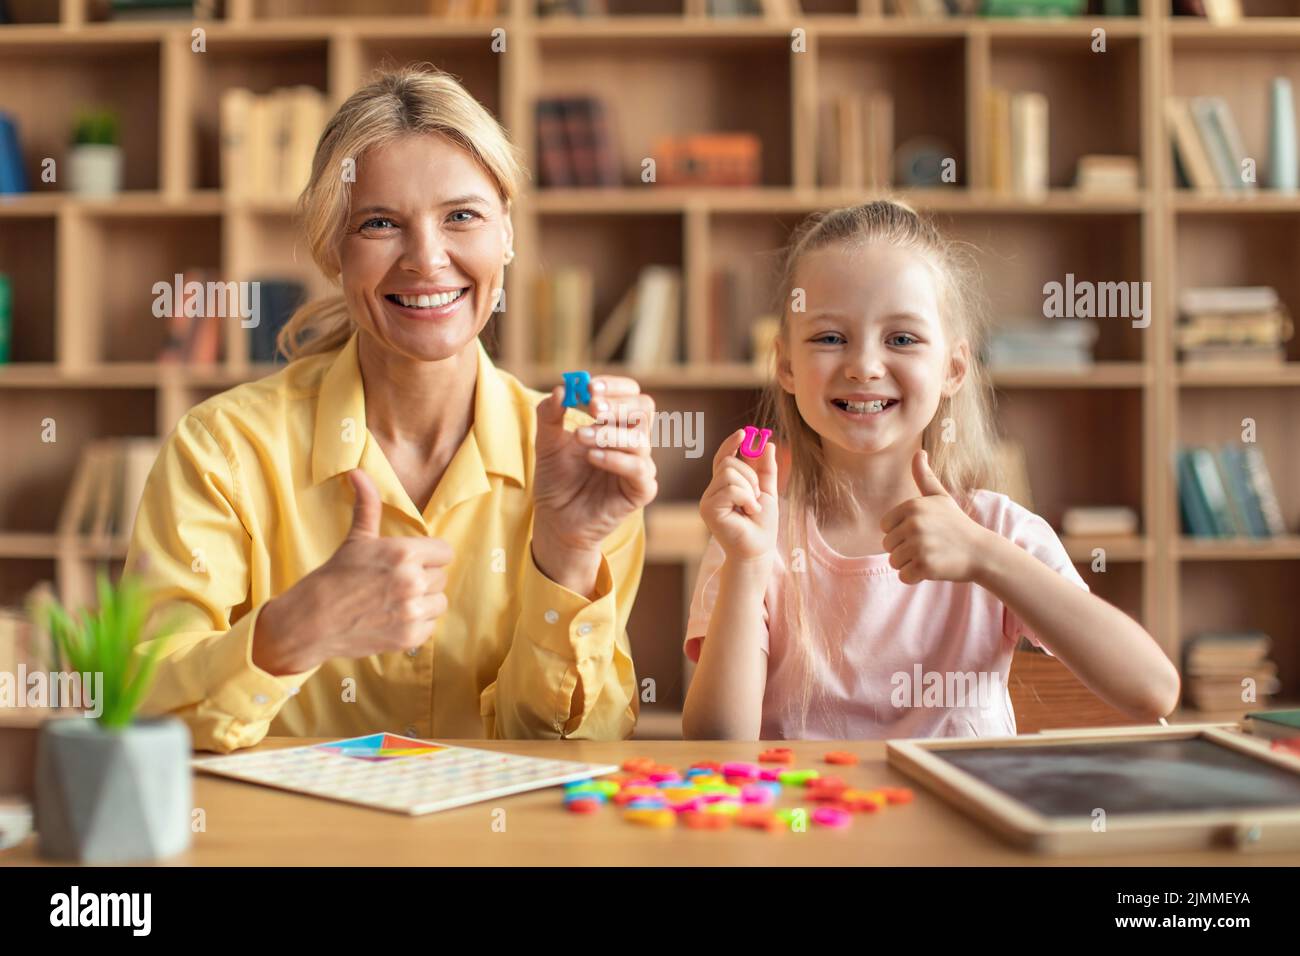 Professional speech therapist curing girl's problems and impediments, child learning letter R and U with private tutor Stock Photo